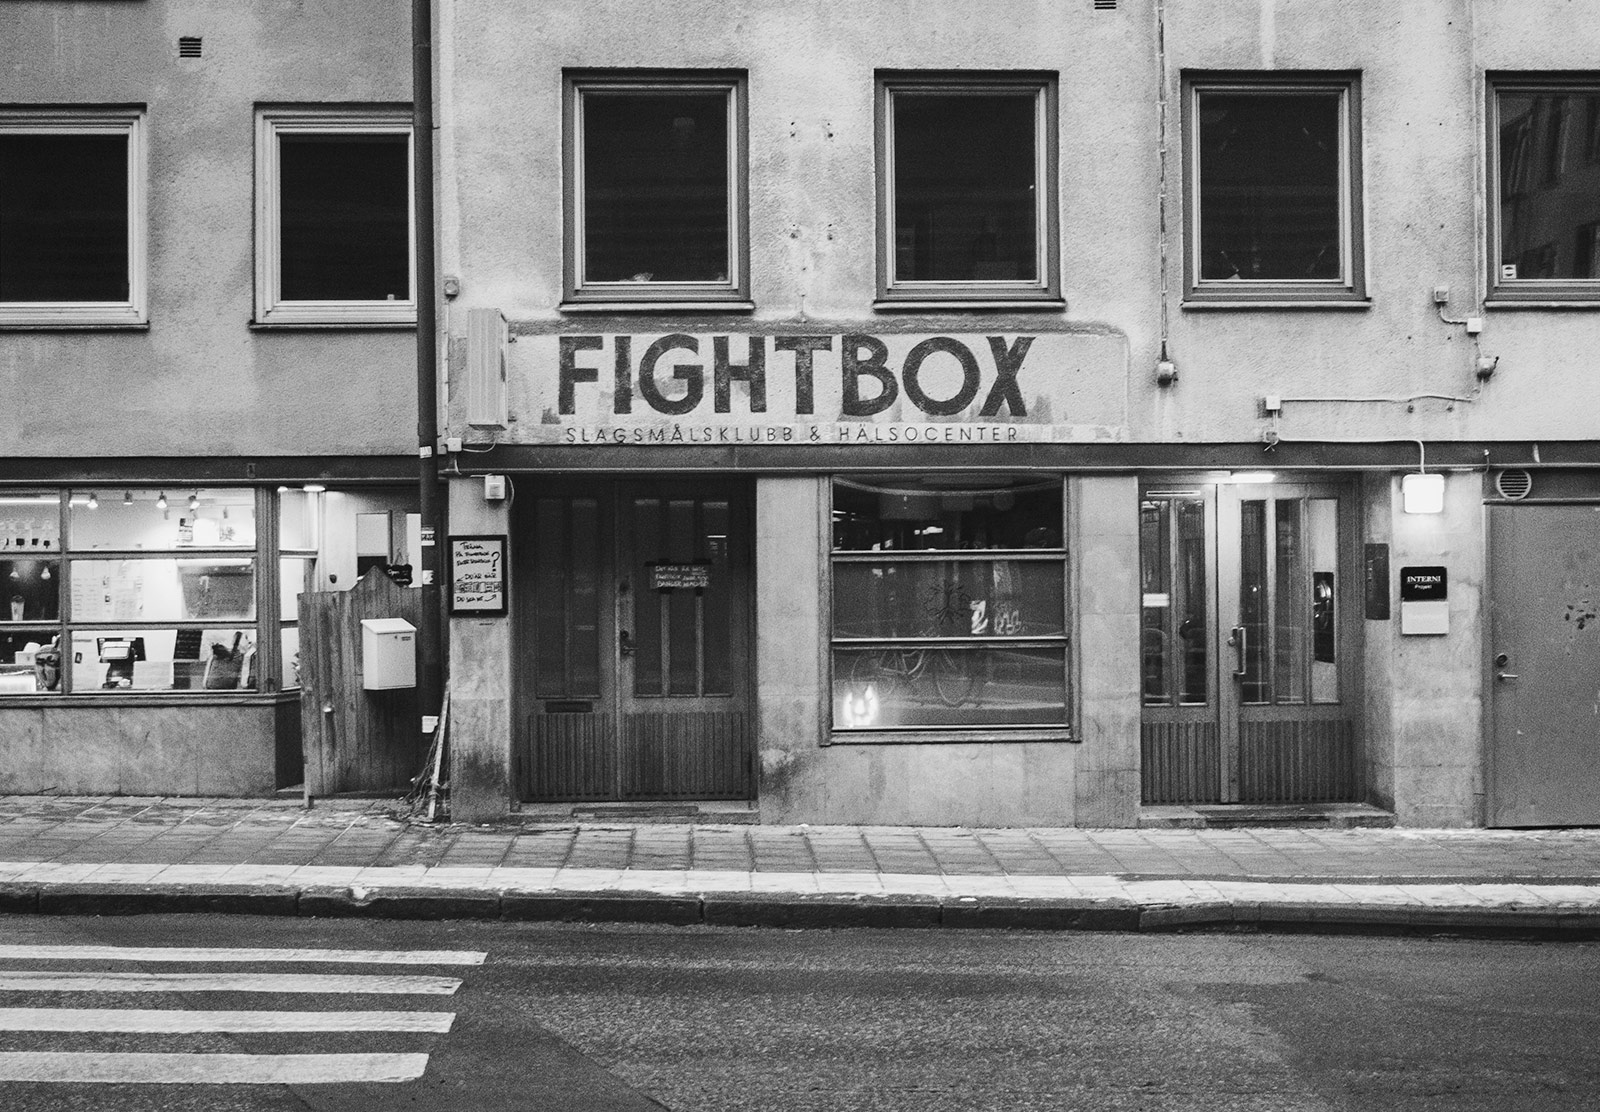 Fightbox sign